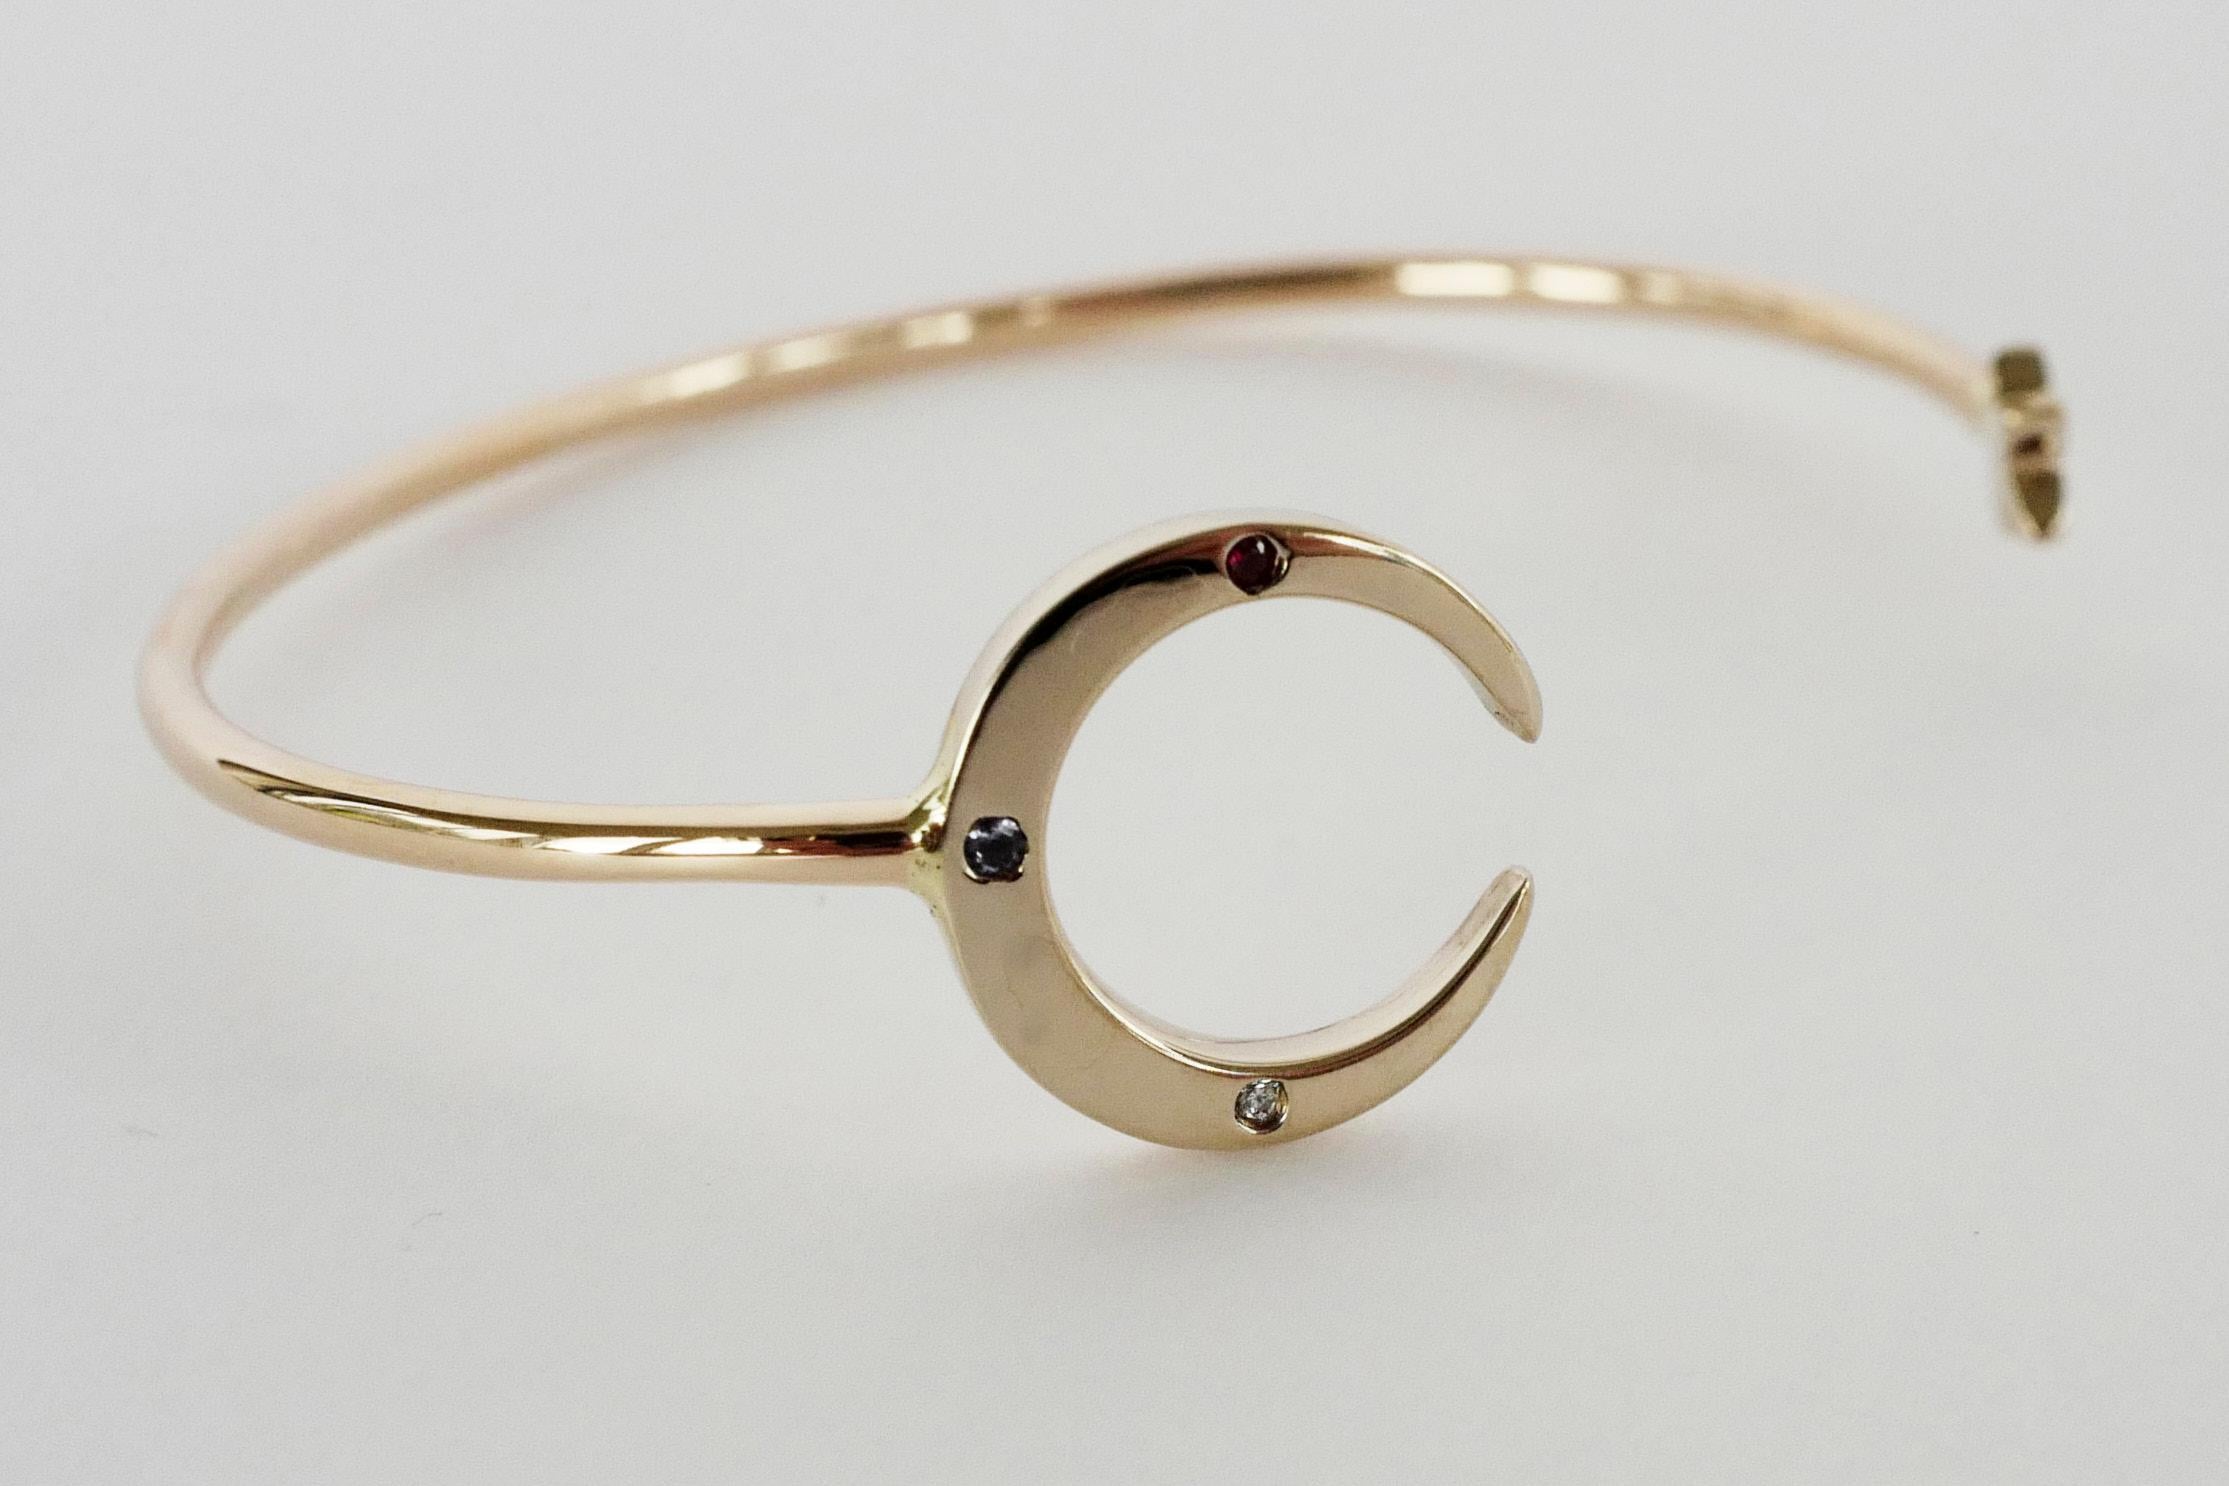 Crescent Moon Star Bangle Bracelet White Diamond Tanzanite Ruby J Dauphin

Hand made in Los Angeles

The word “crescent” comes from the Latin term ceres meaning to “bring forth, create” and crescere, the Latin term for “grow, thrive”.
It is used as